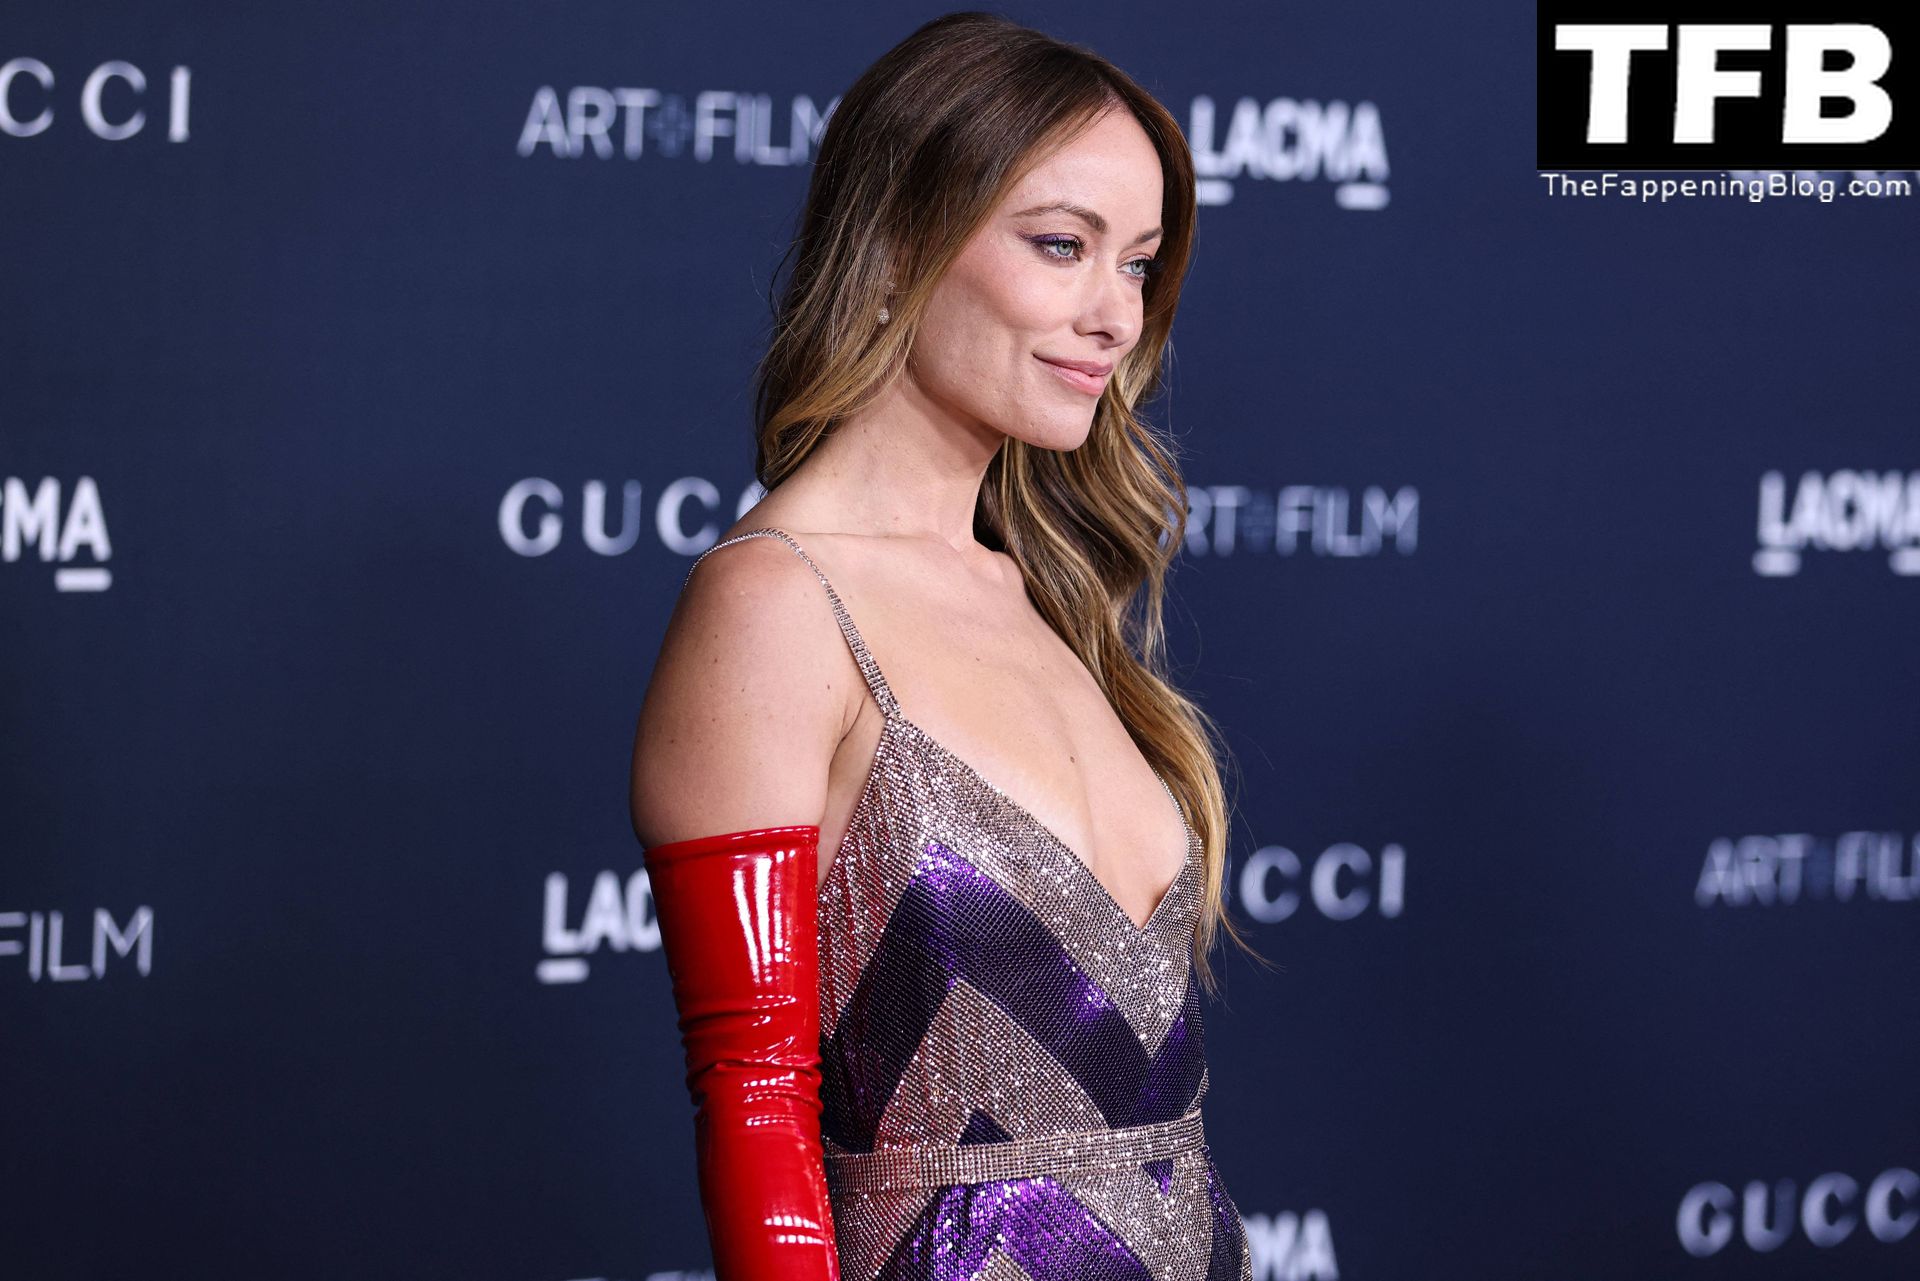 Olivia-Wilde-Sexy-The-Fappening-Blog-26.jpg